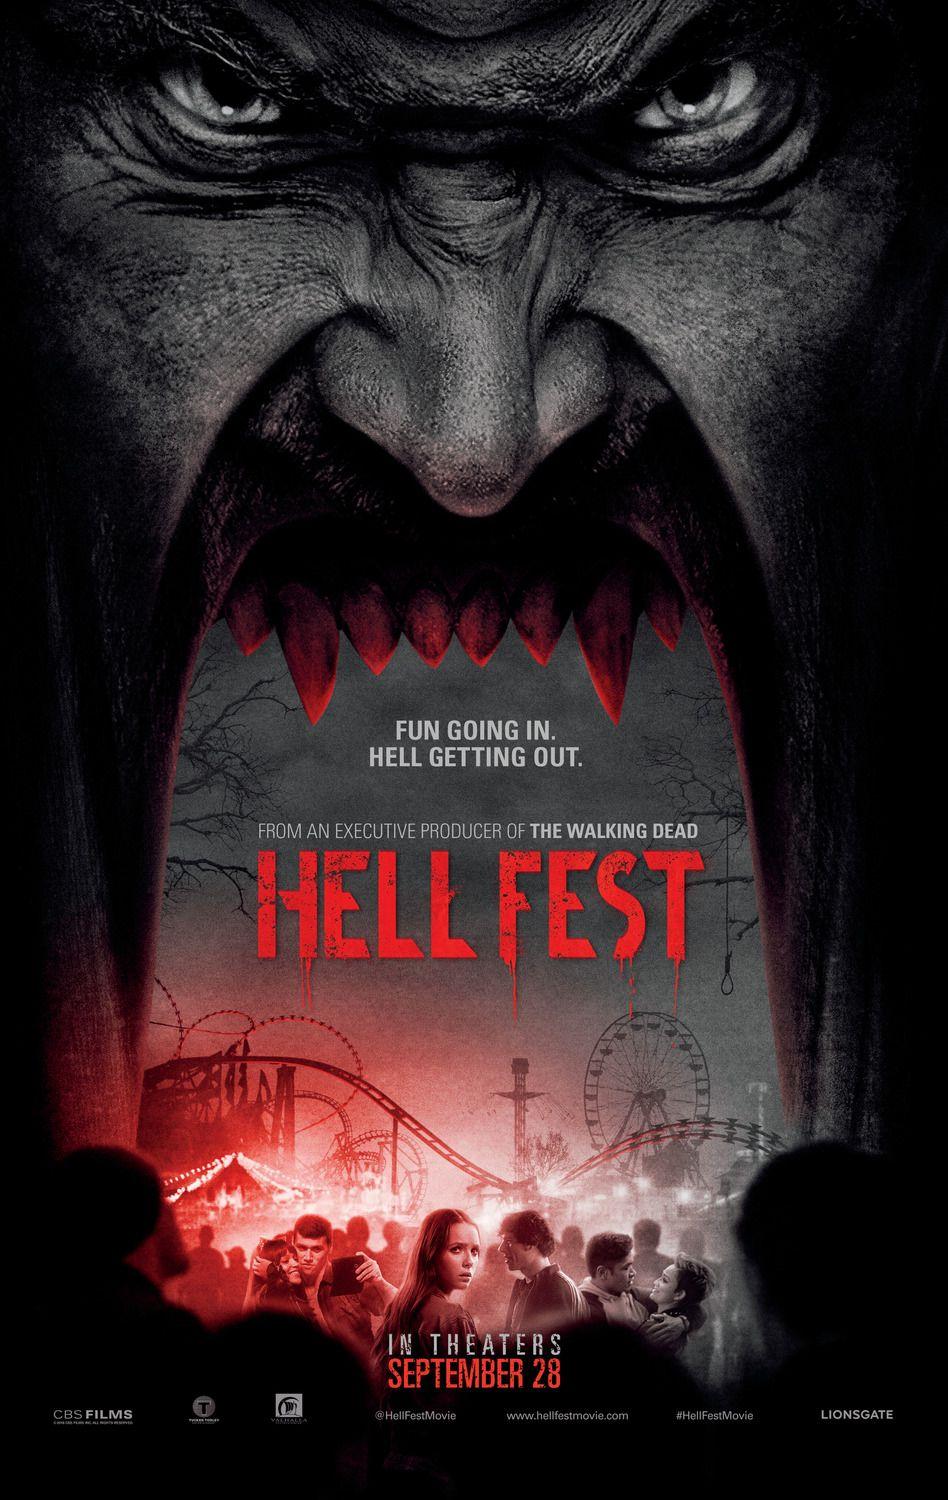 Hell Fest 392199 Gallery, Image, Posters, Wallpaper and Stills